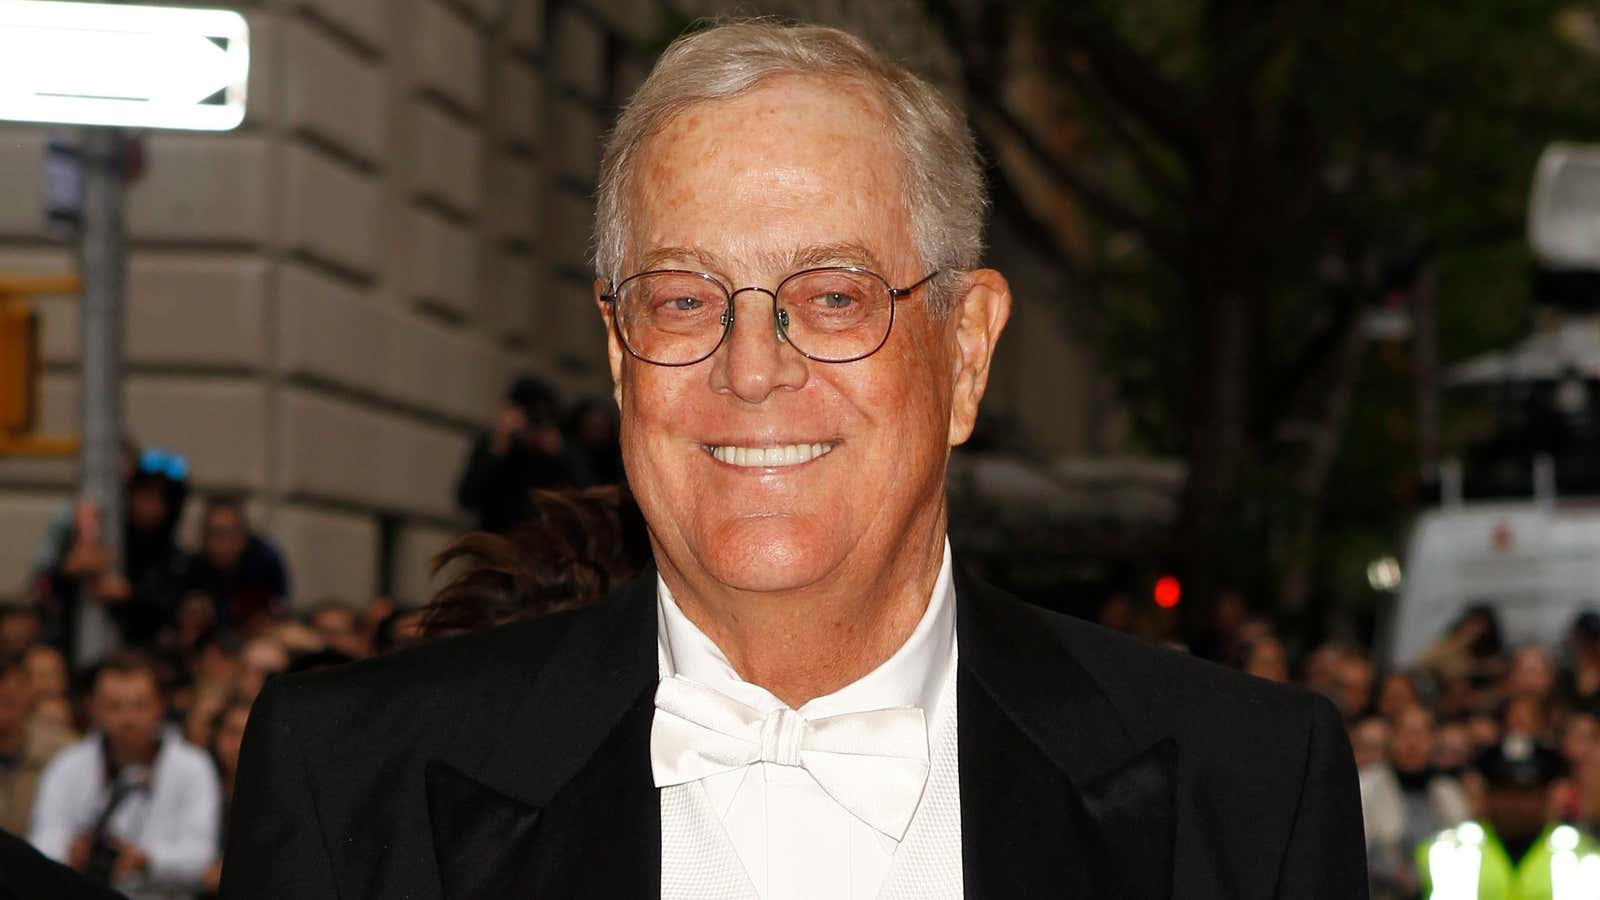 Billionaire David Koch doesn’t want millennials to be happy paying taxes.